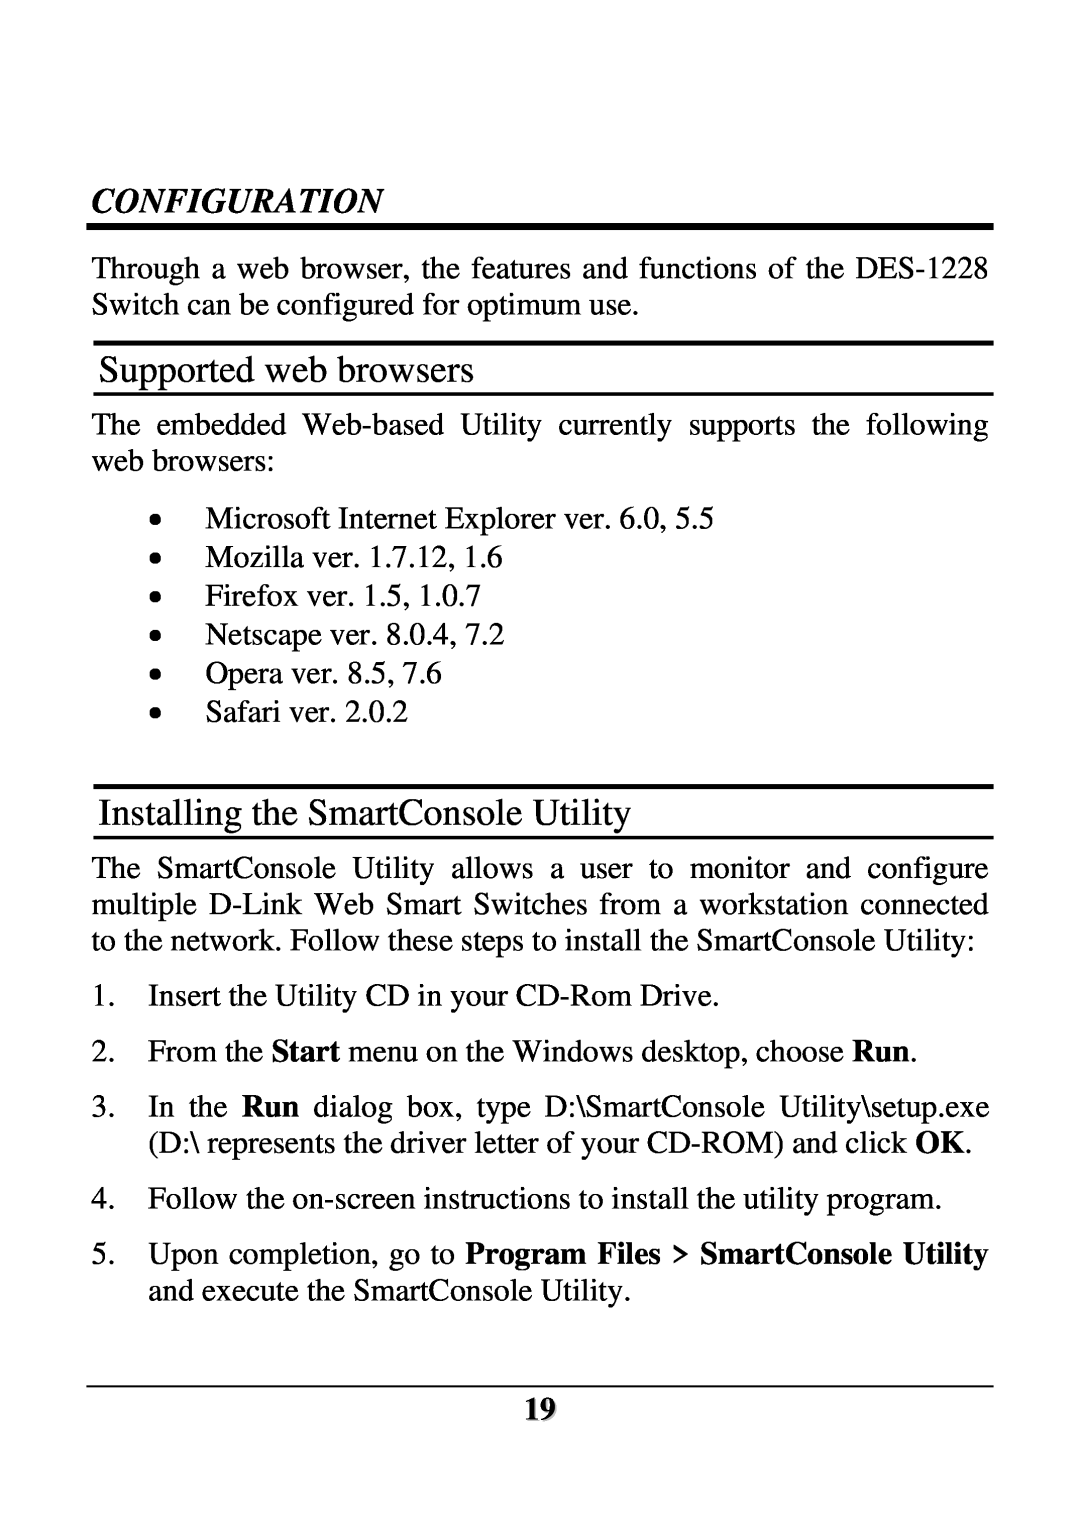 D-Link DES-1228 user manual Supported web browsers, Installing the SmartConsole Utility, Configuration 